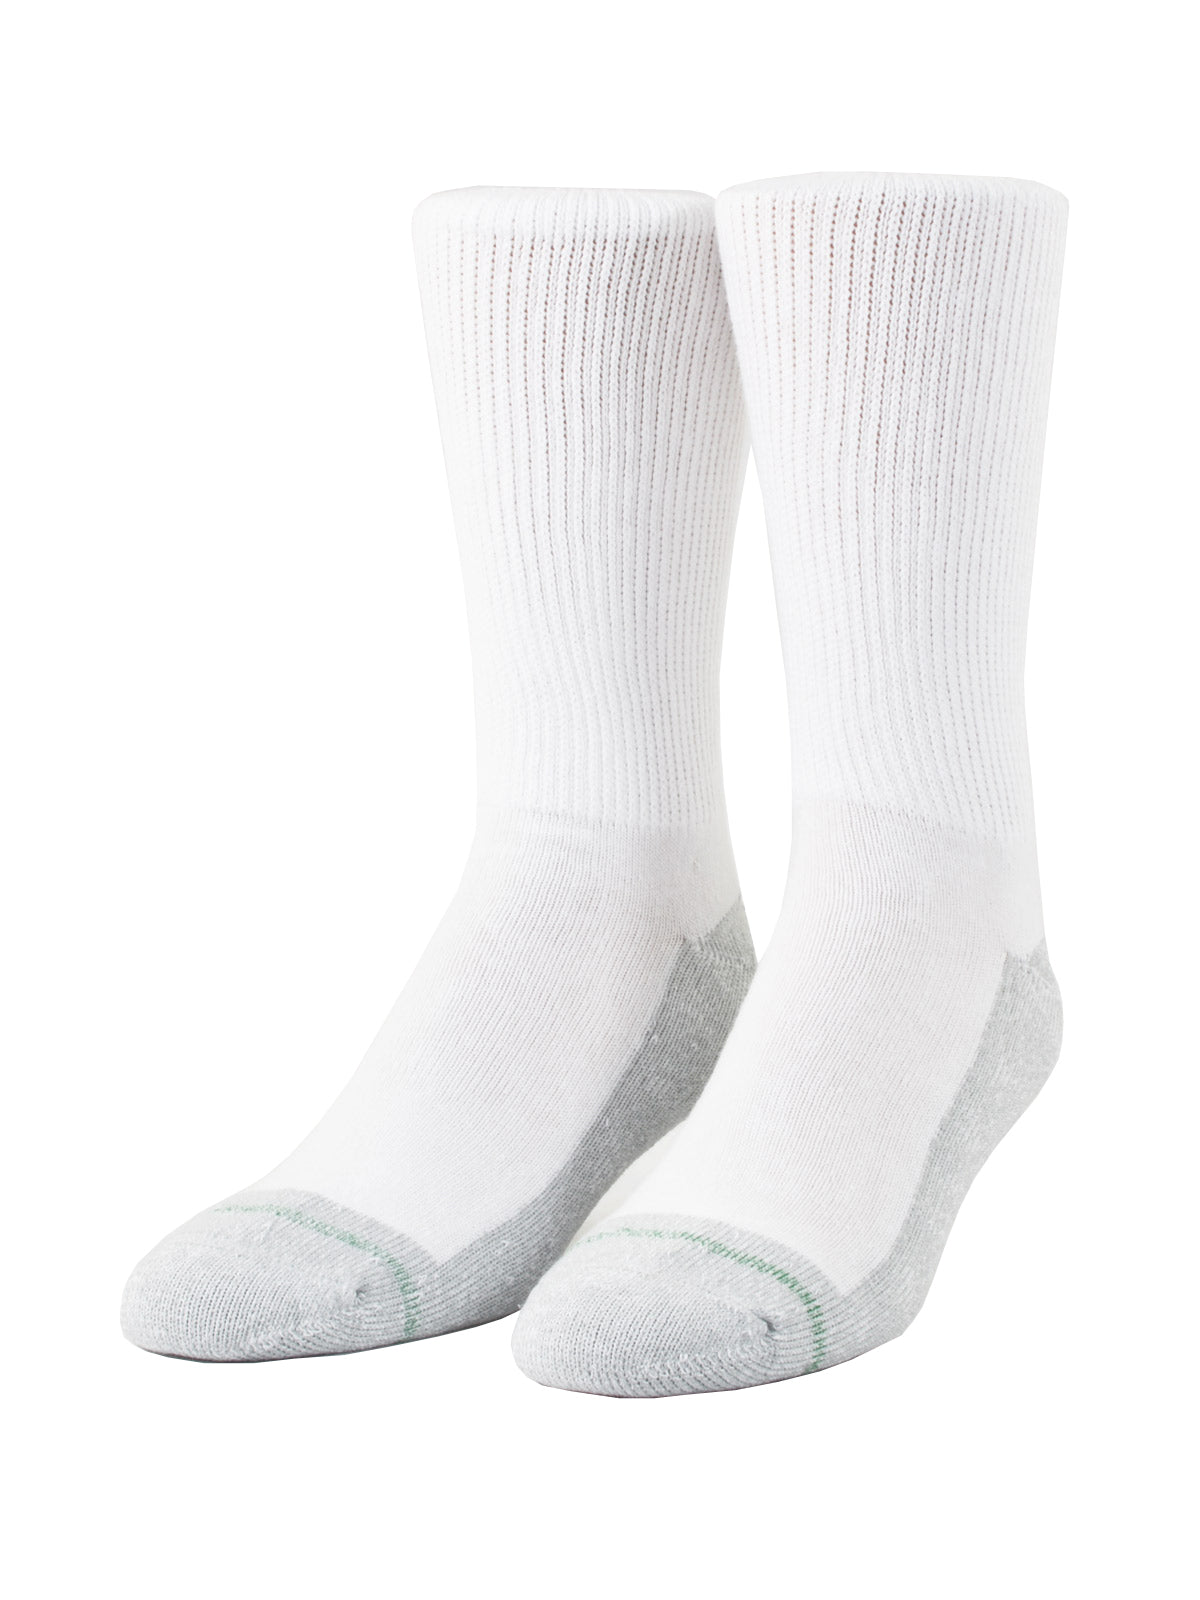 Wool Loose Fit Stays Up Sock For Men – Extra Wide Socks